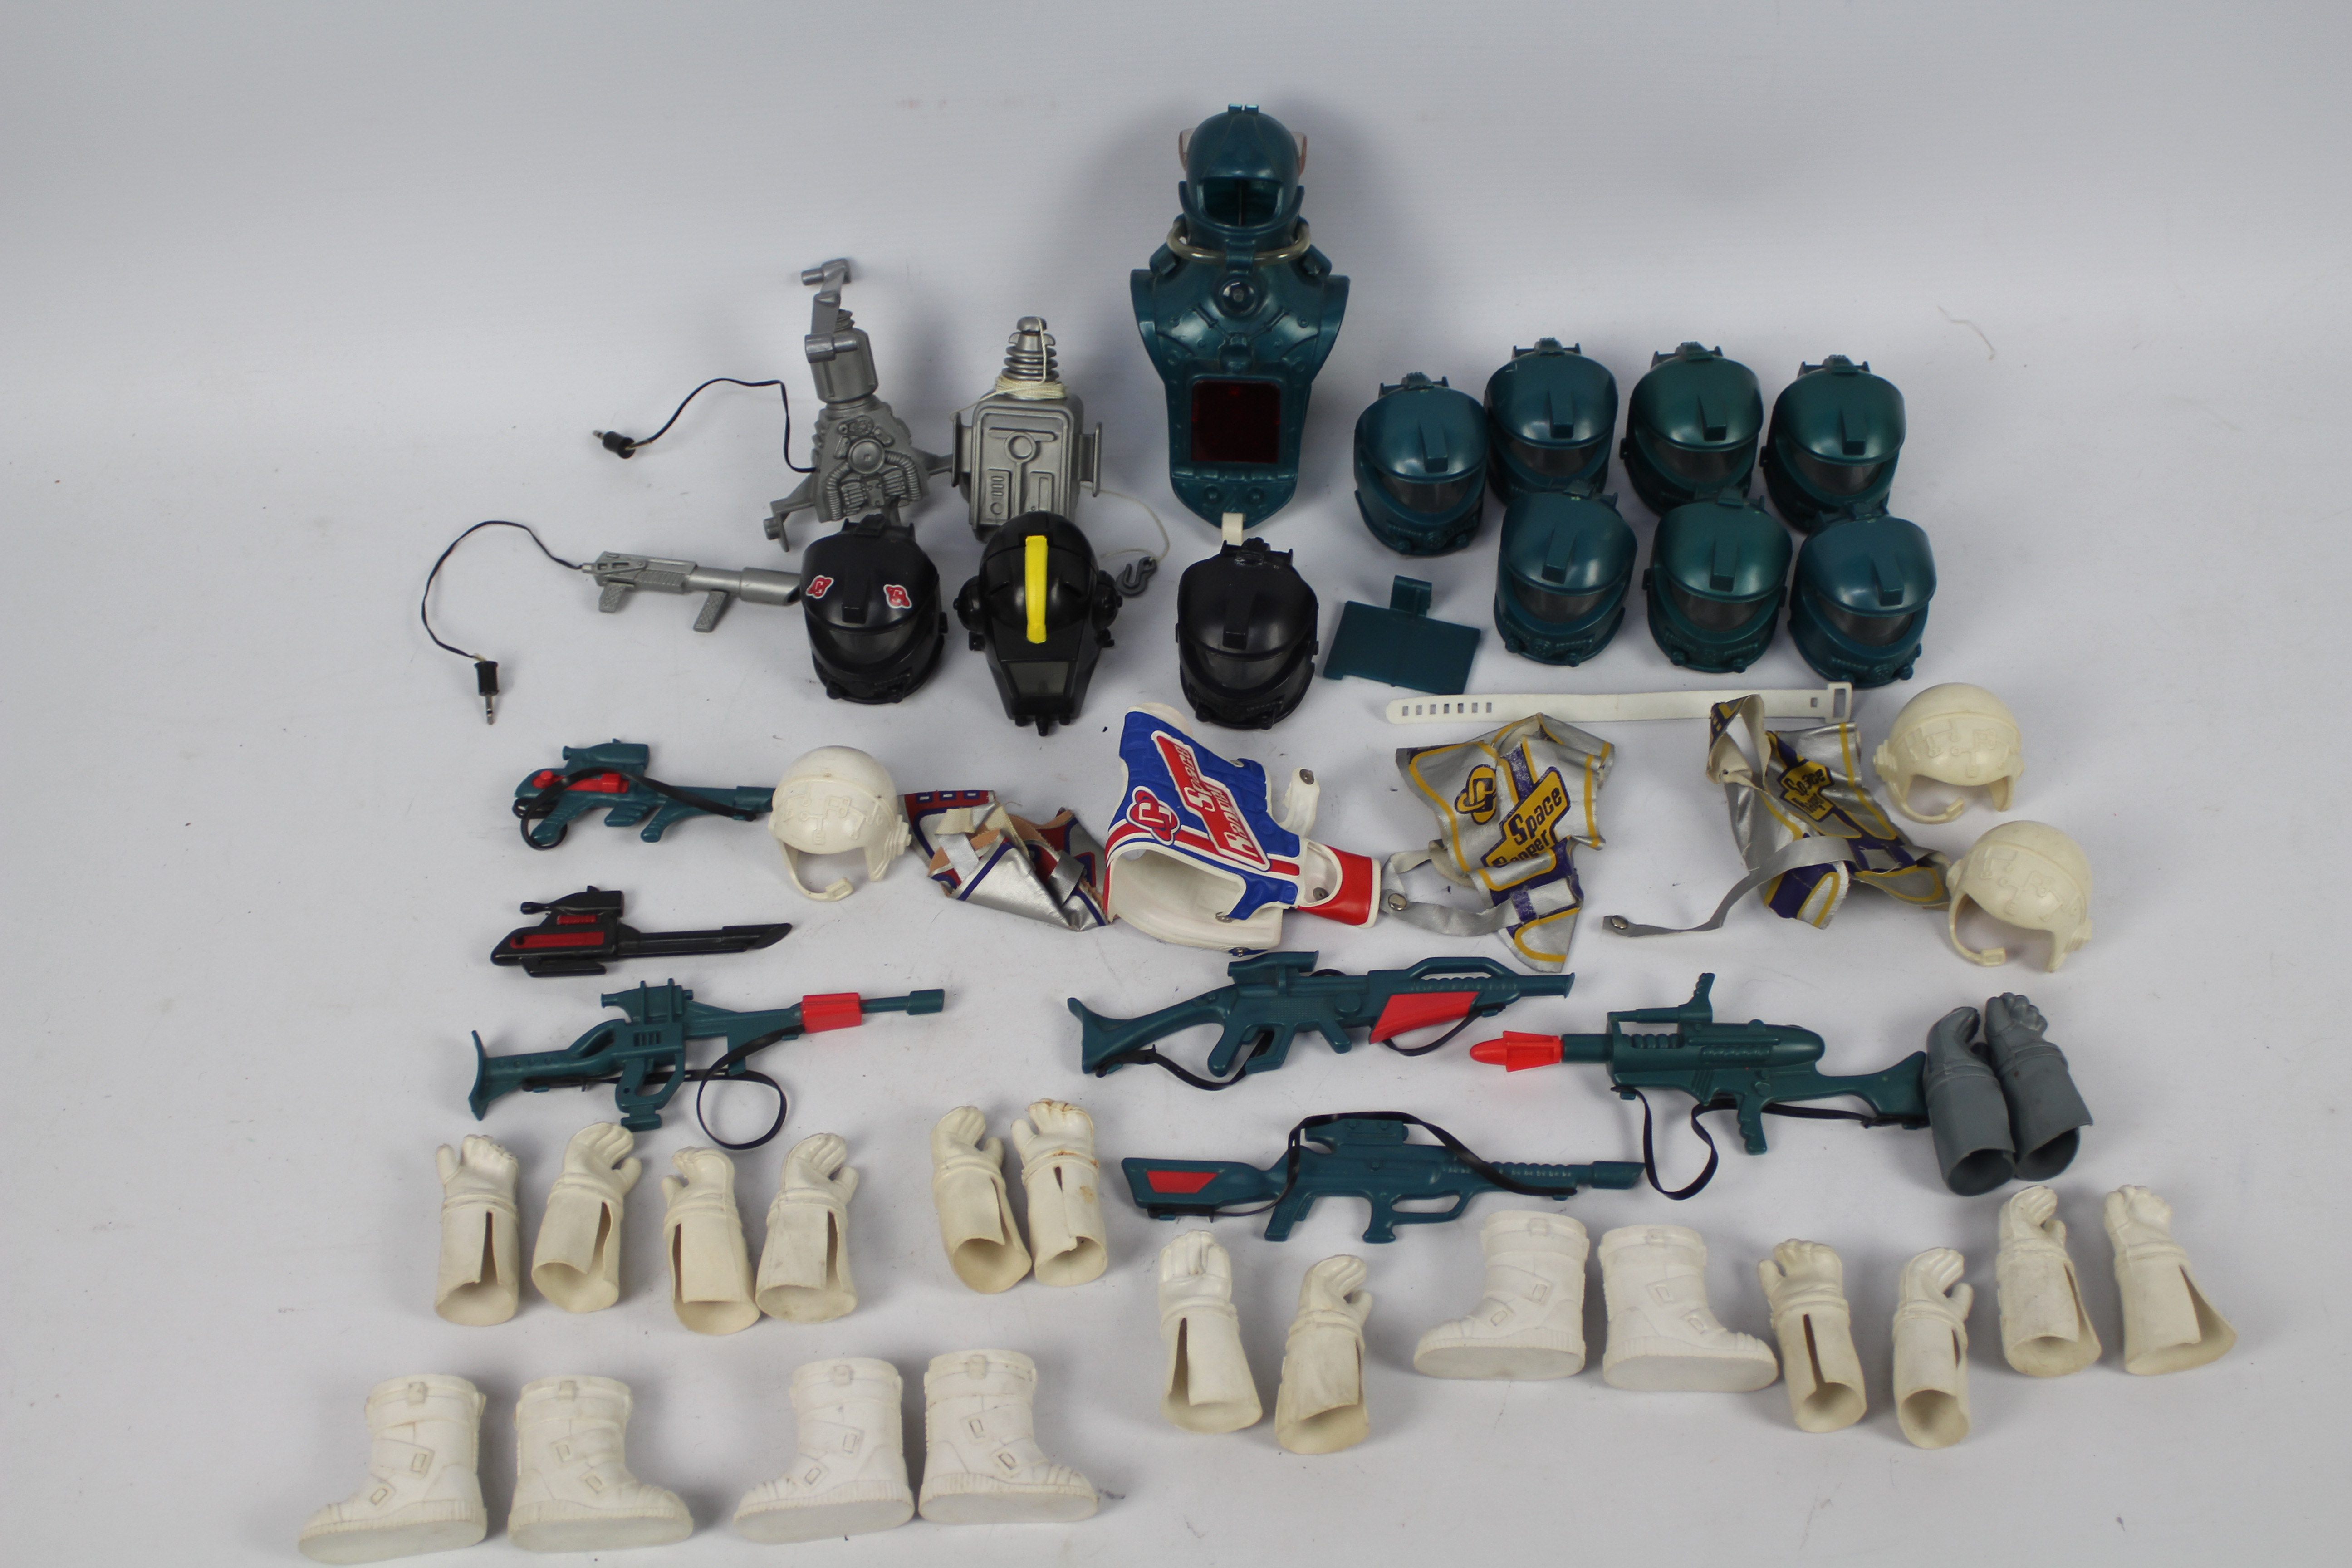 Palitoy - Hasbro - Action Man - A collection of loose Palitoy Action Man 'Space Ranger' accessories